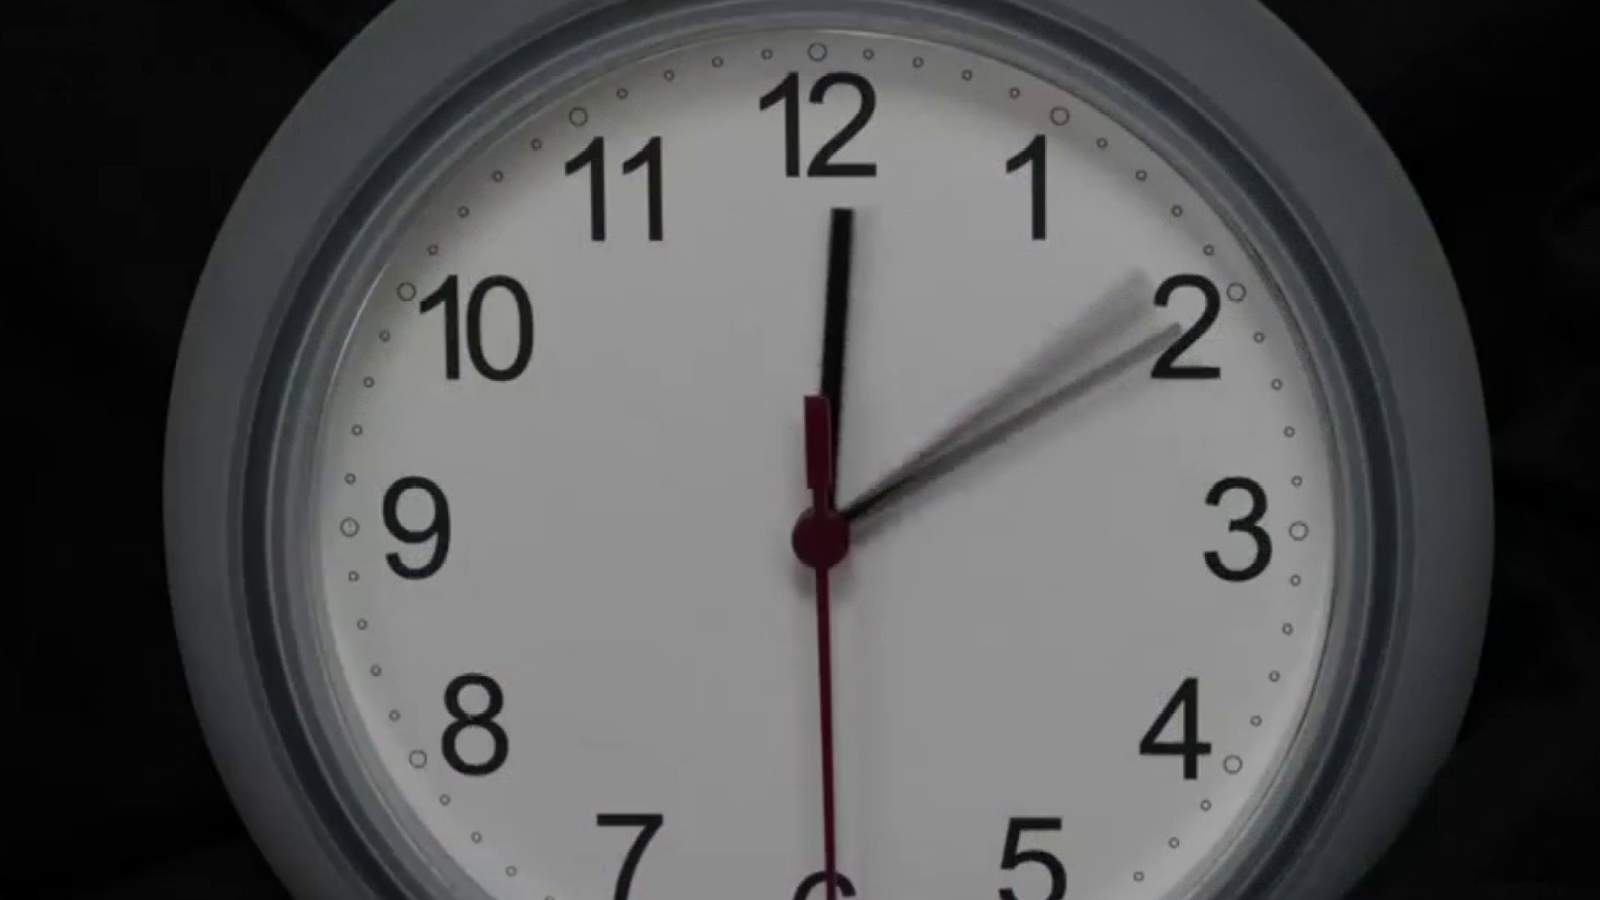 How has COVID-19 pandemic impacted your perception of time?